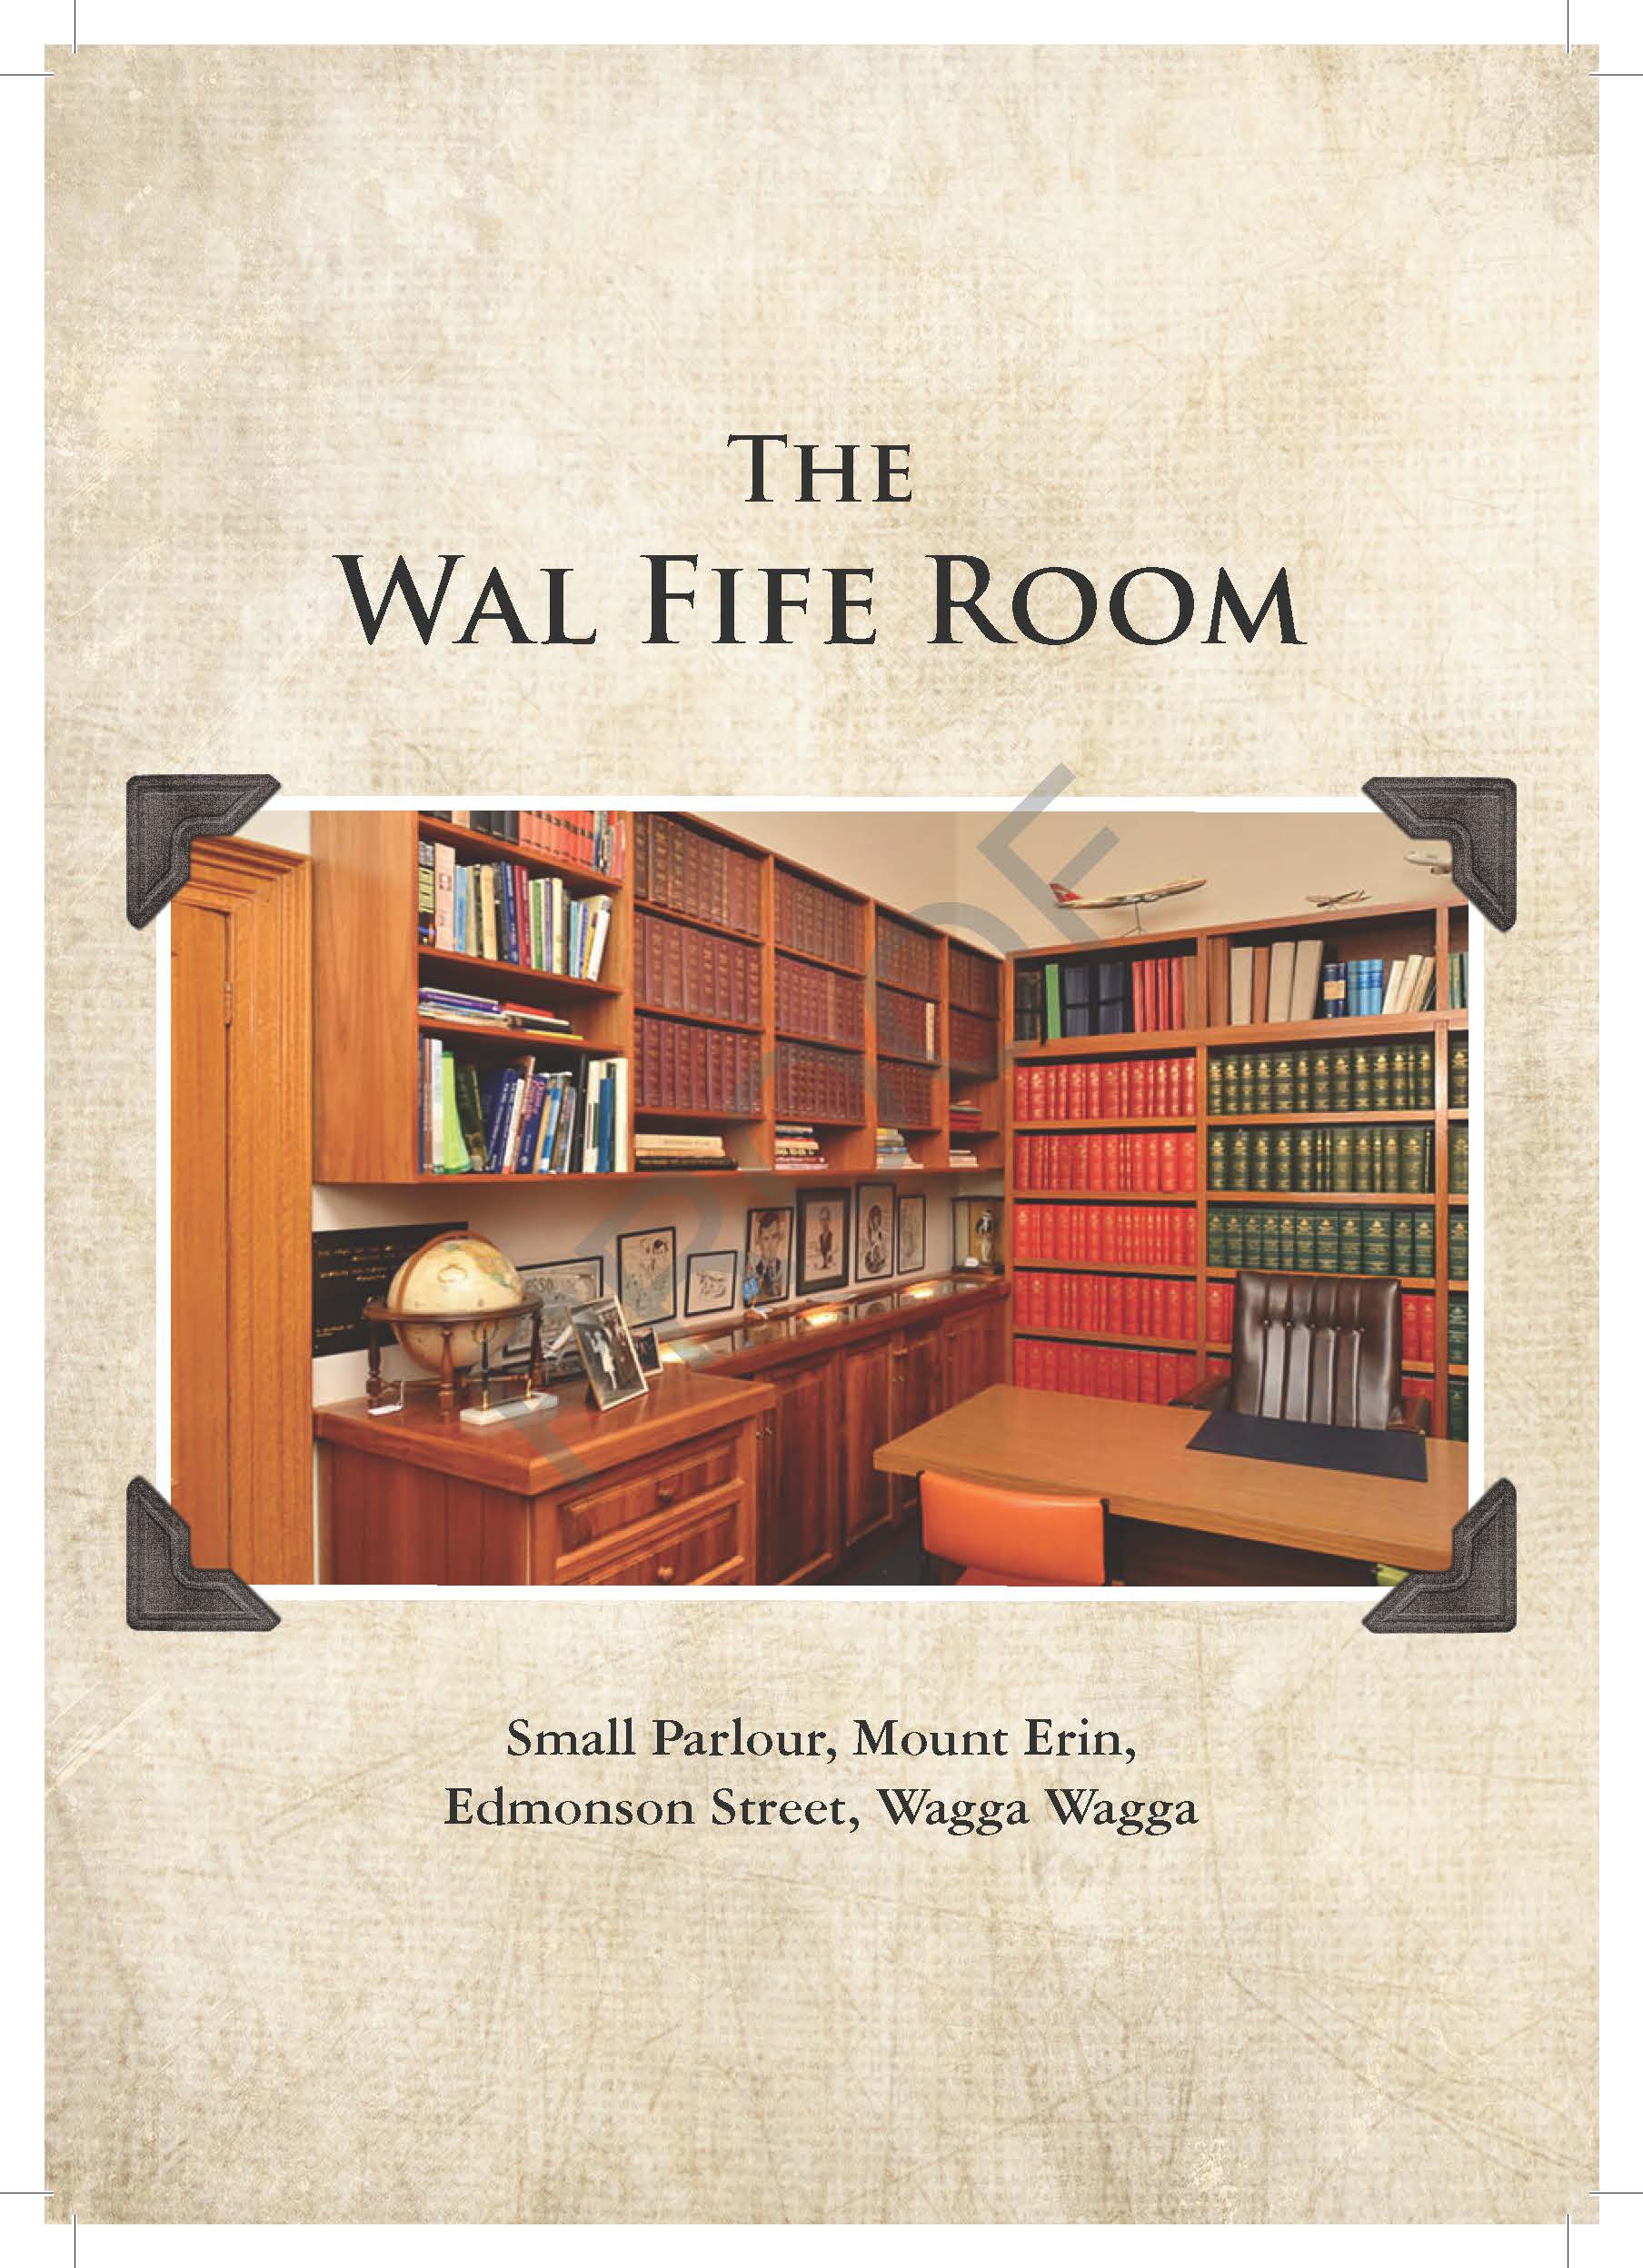 wal fife room opening booklet front page